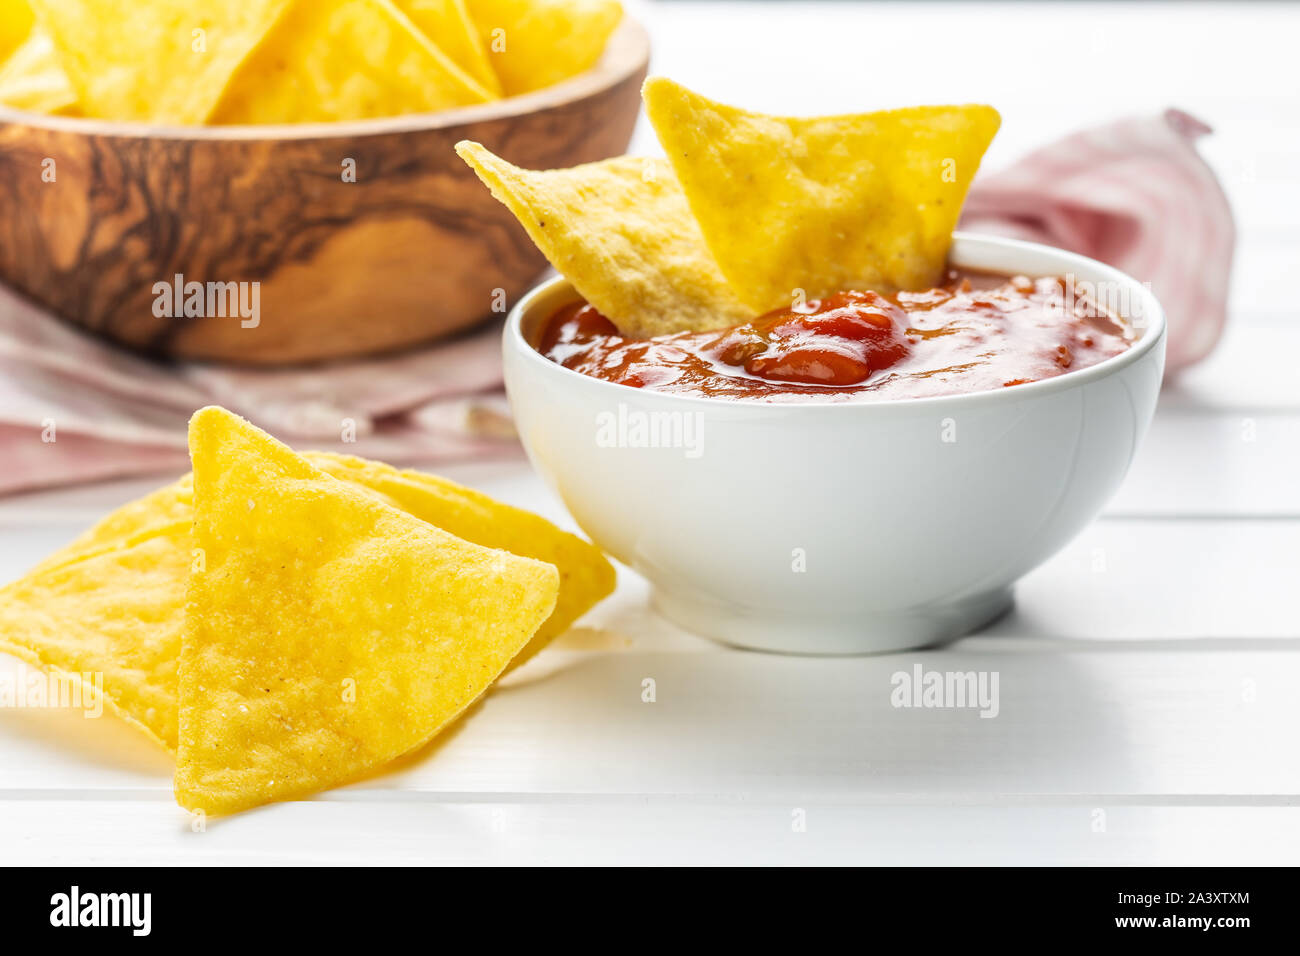 Corn nacho chips and tomato dip. Yellow tortilla chips and salsa on white table. Stock Photo